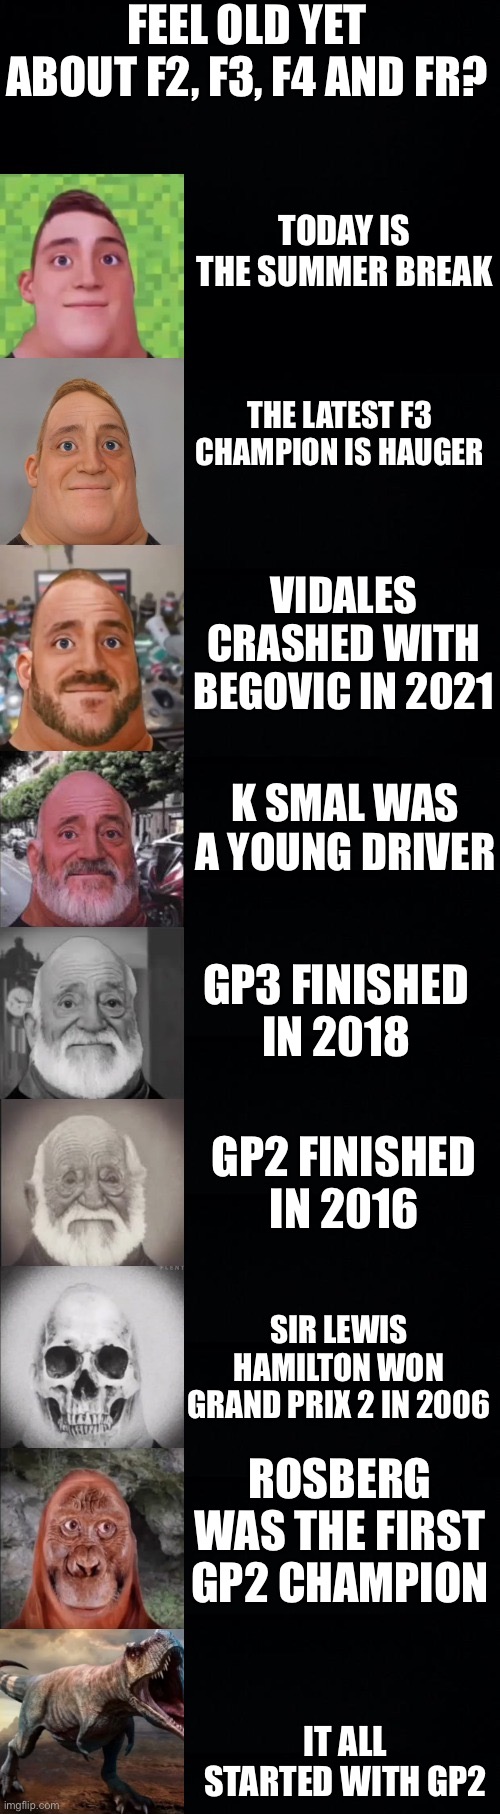 Feel old yet? | FEEL OLD YET ABOUT F2, F3, F4 AND FR? TODAY IS THE SUMMER BREAK; THE LATEST F3 CHAMPION IS HAUGER; VIDALES CRASHED WITH BEGOVIC IN 2021; K SMAL WAS A YOUNG DRIVER; GP3 FINISHED IN 2018; GP2 FINISHED IN 2016; SIR LEWIS HAMILTON WON GRAND PRIX 2 IN 2006; ROSBERG WAS THE FIRST GP2 CHAMPION; IT ALL STARTED WITH GP2 | image tagged in mr incredible becoming old | made w/ Imgflip meme maker